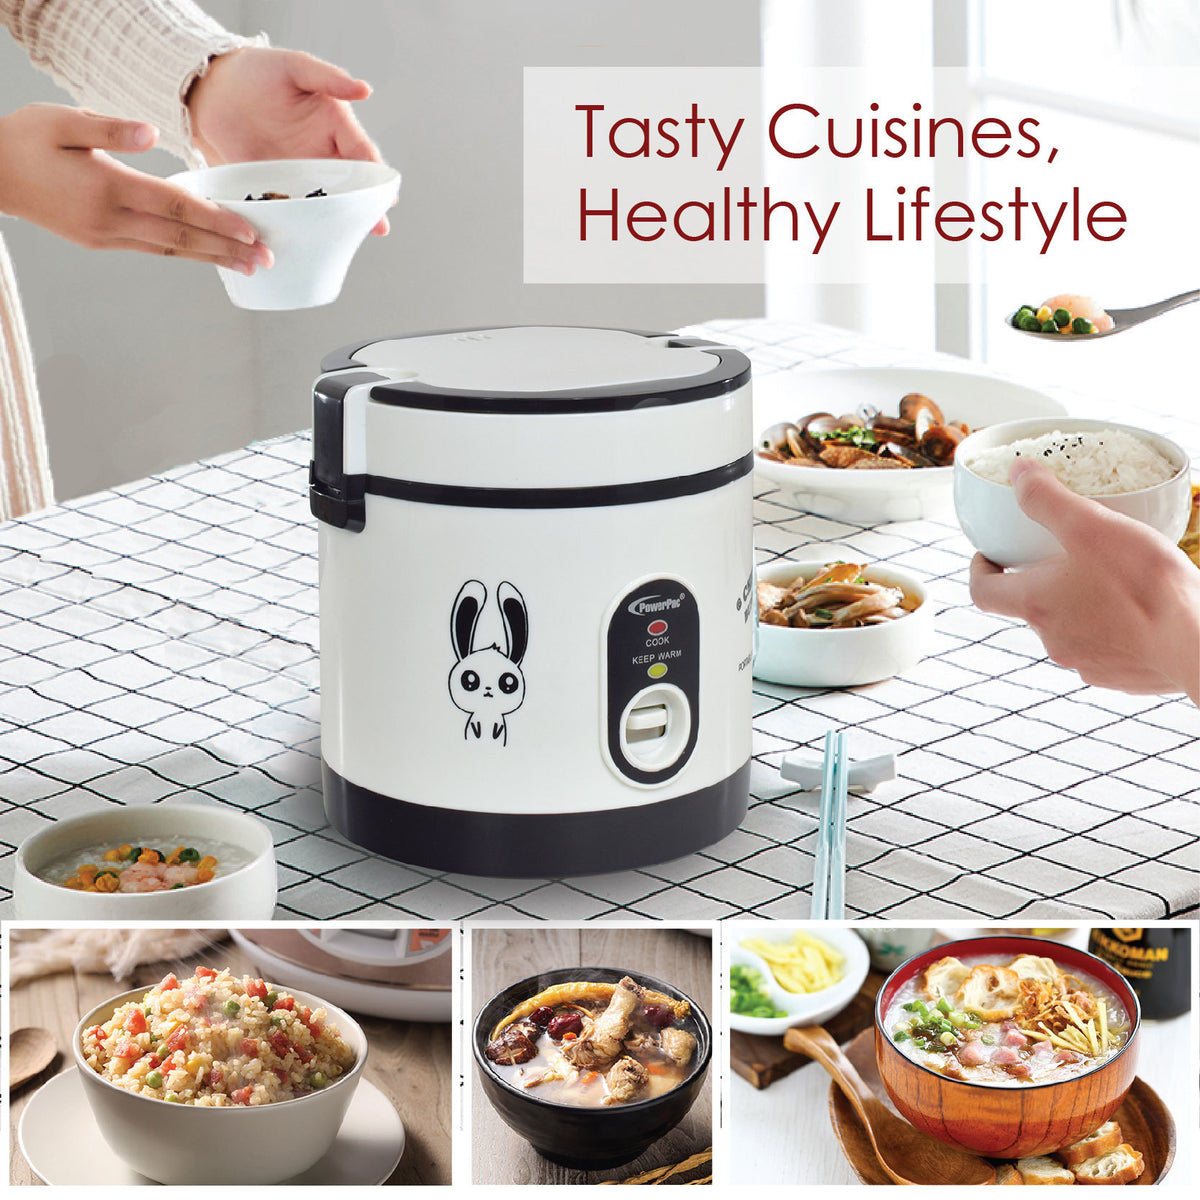 0.6L Portable Rice Cooker with Stainless Steel Steamer Food Tray (PPRC09) - PowerPacSG